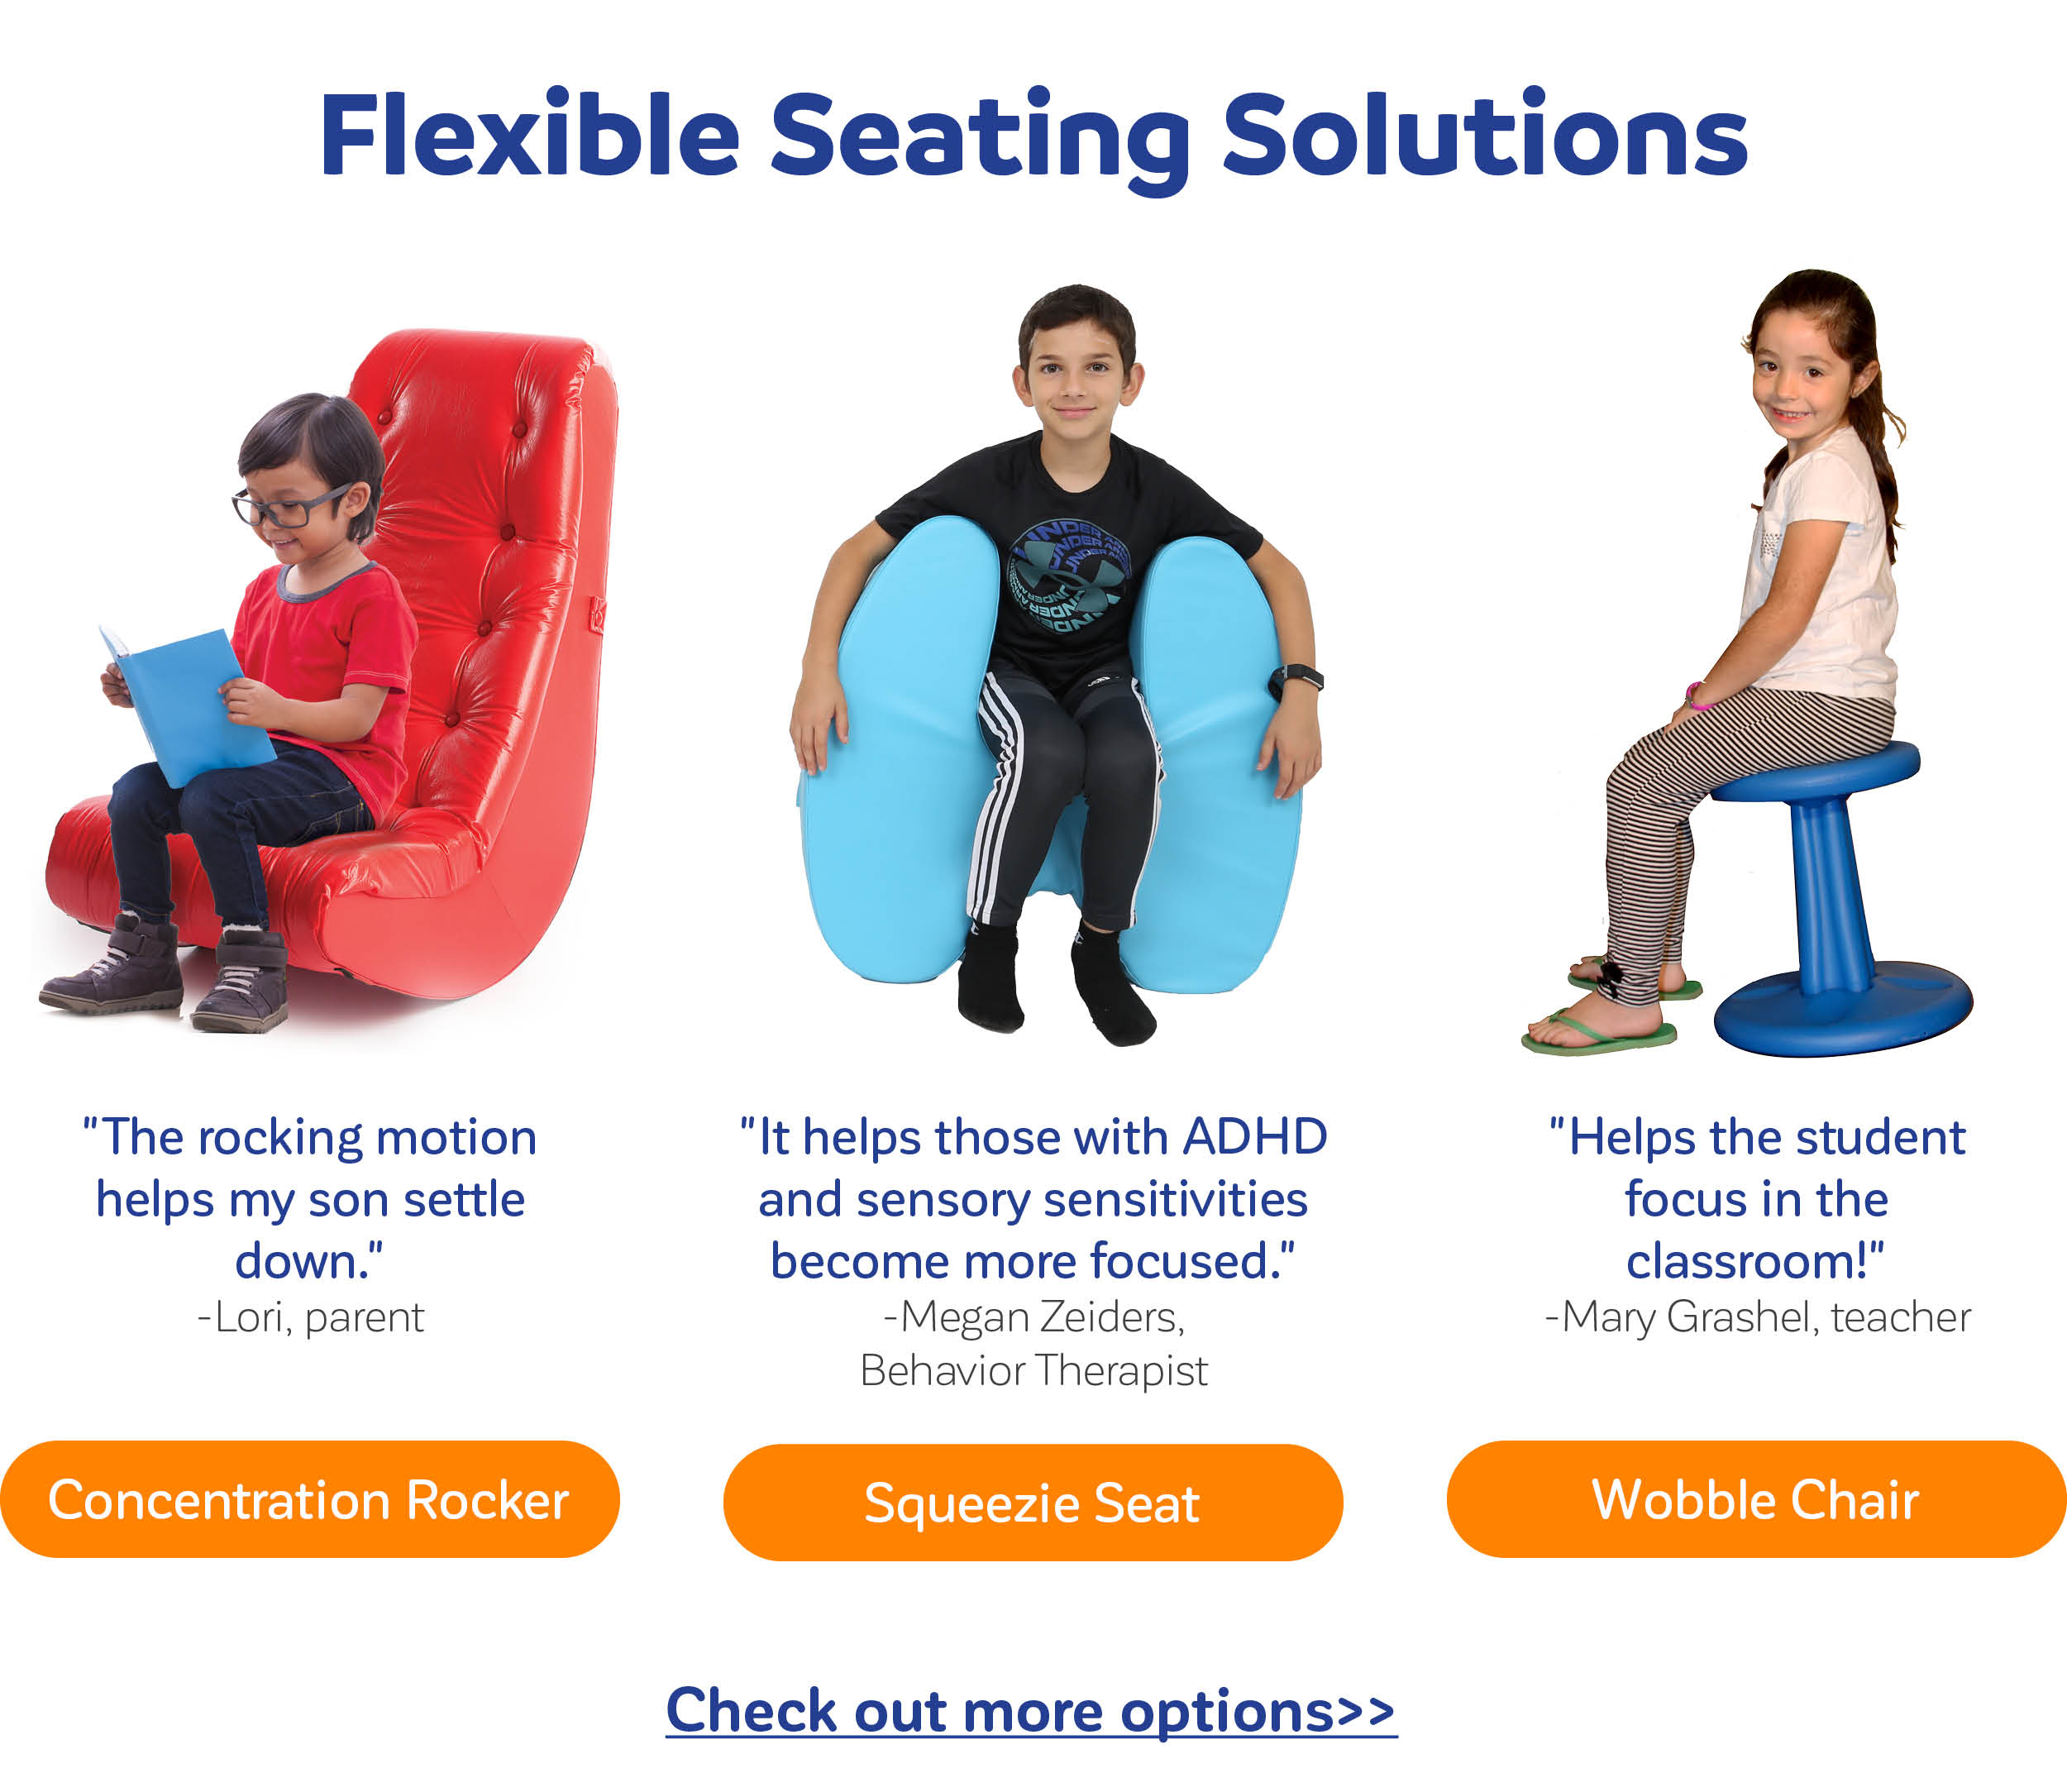 All Products - Active Seating Solutions for ADHD, Autism, Sensory – KINNEBAR